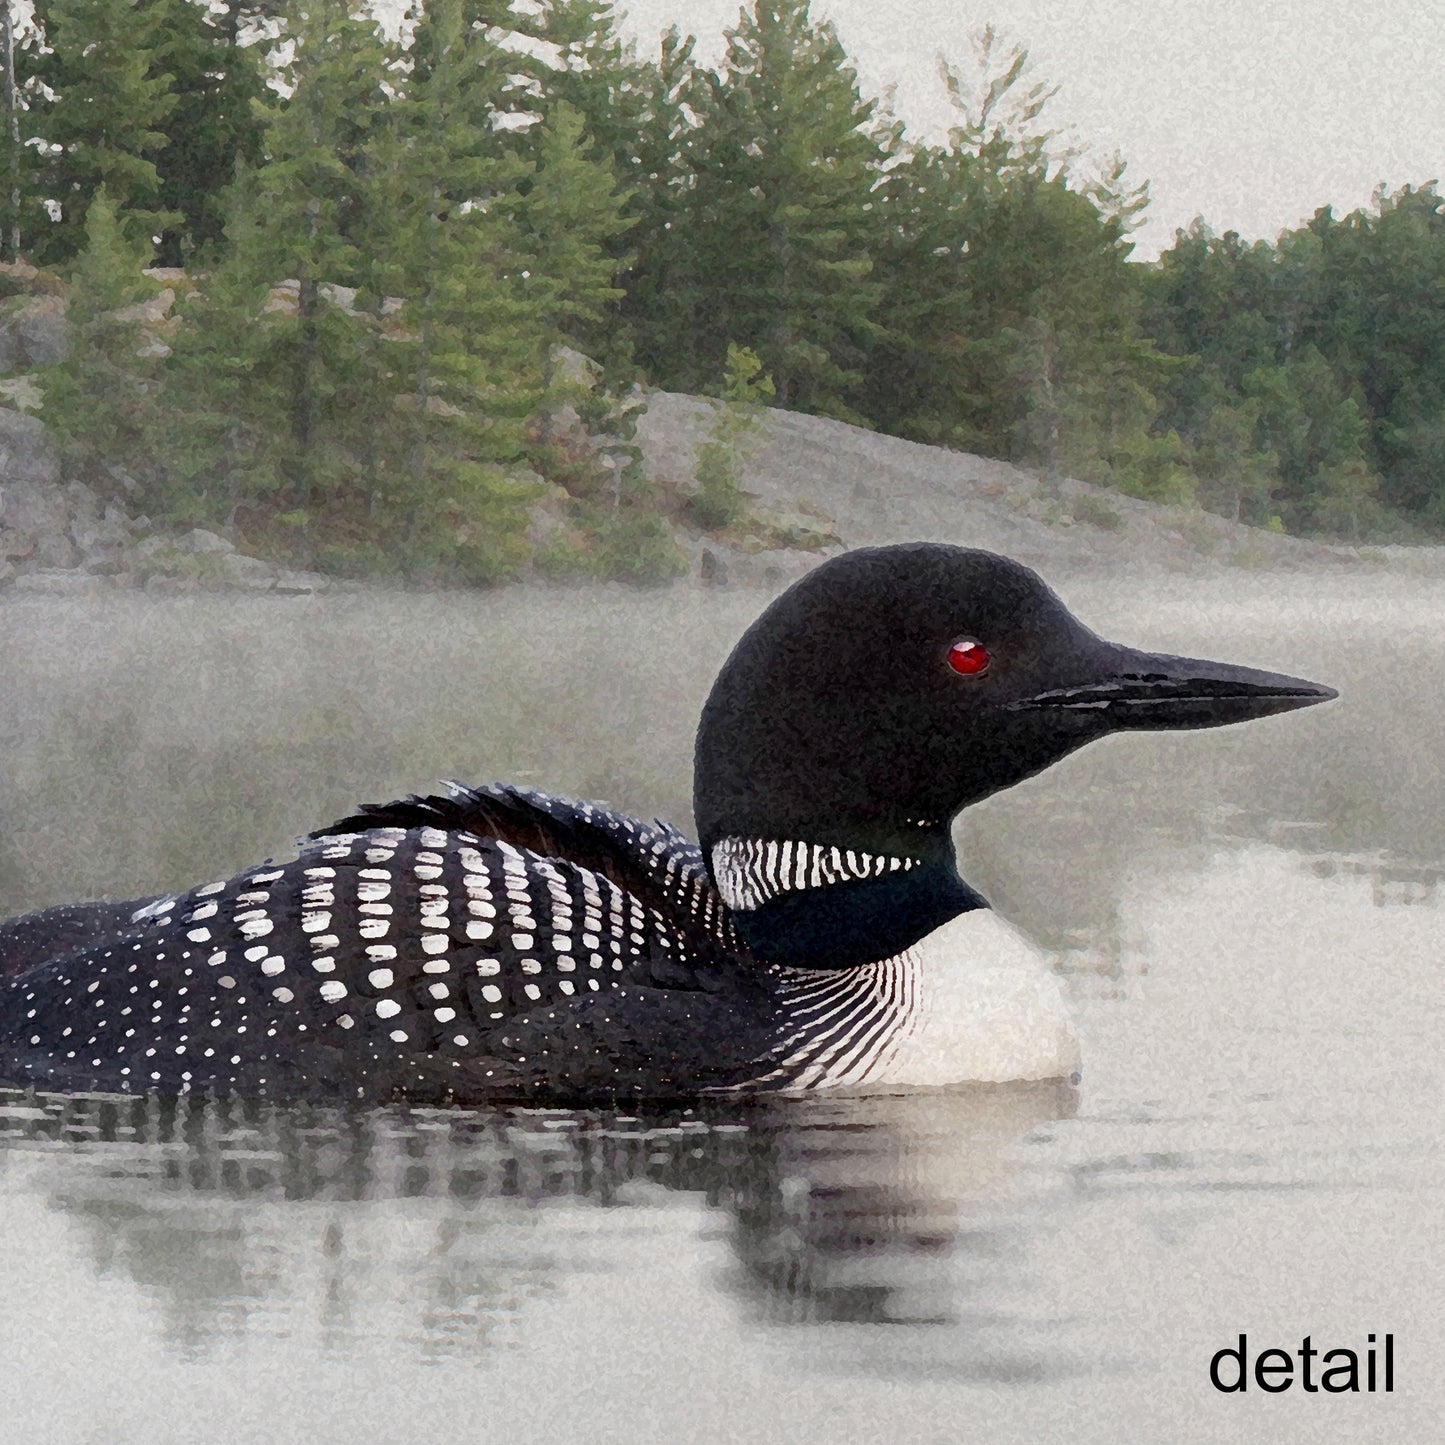 Loon on the Water Designer Greeting Card